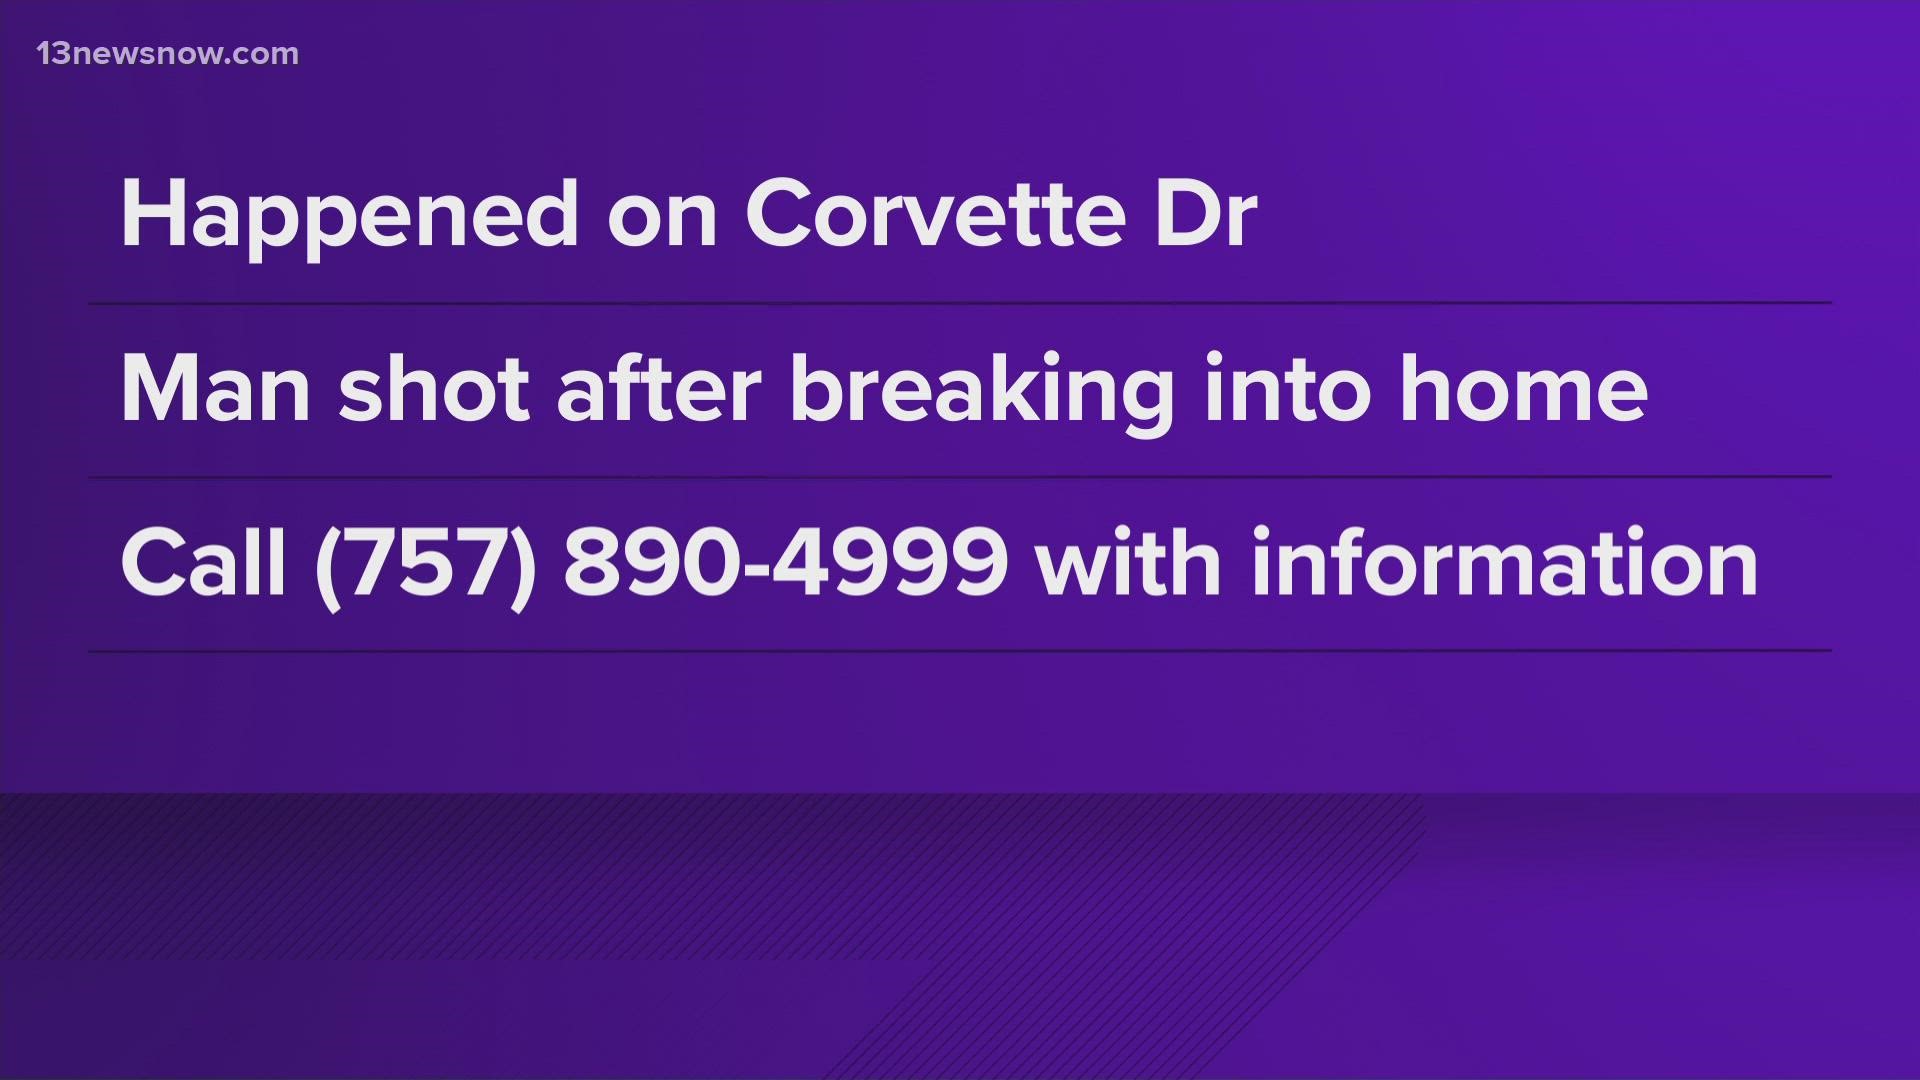 The sheriff's office said the incident happened in the 300 block of Corvette Drive around 4:30 p.m.